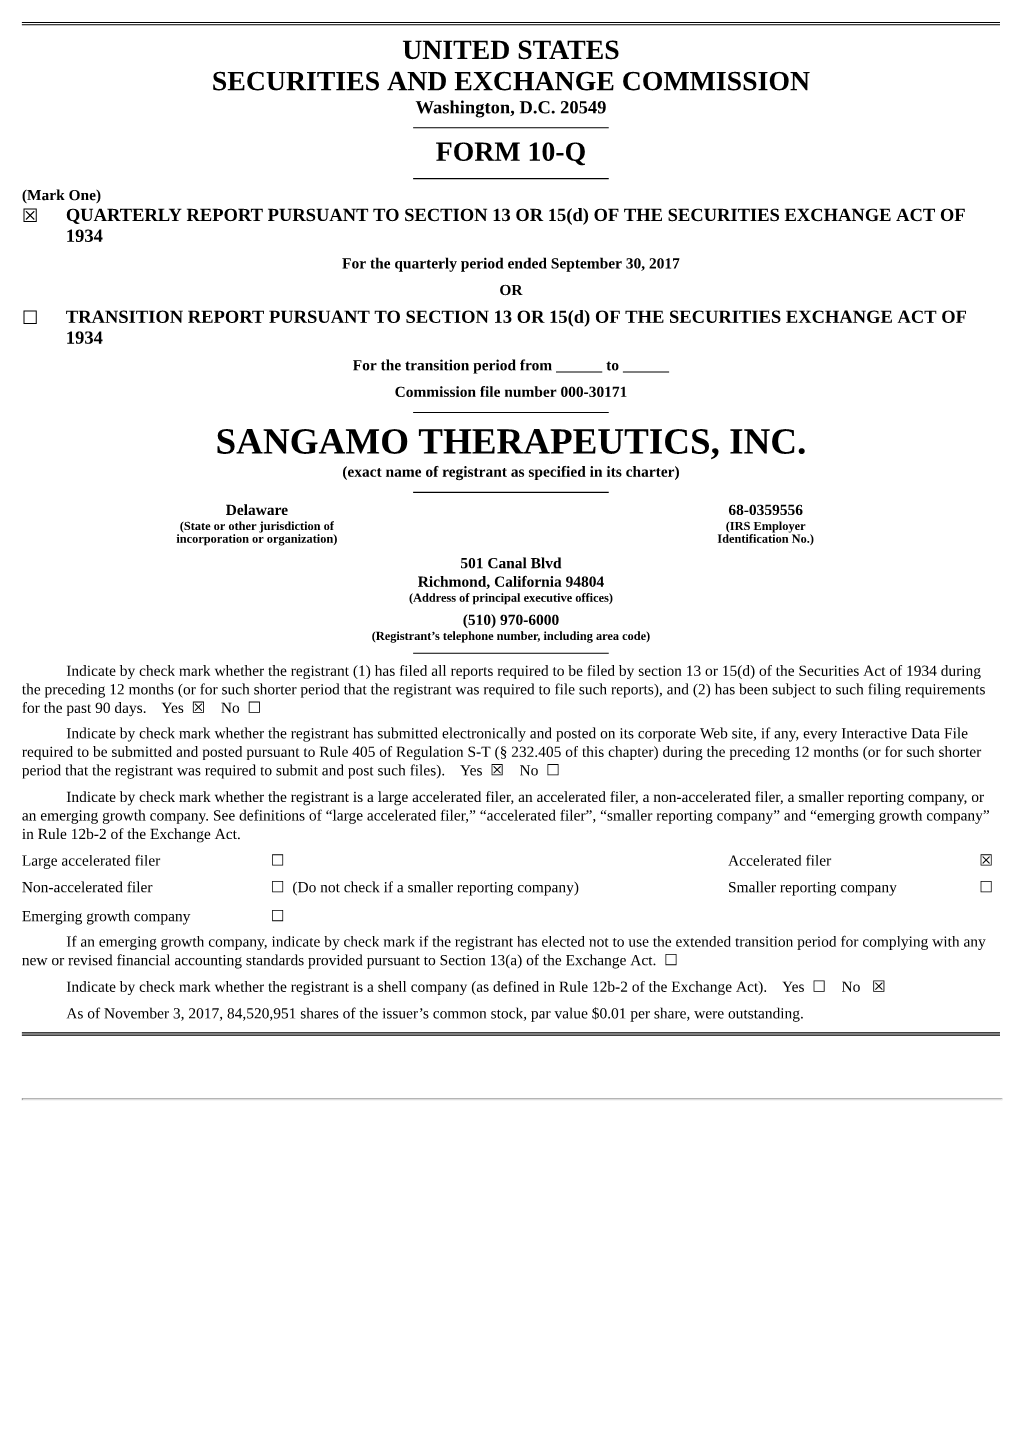 SANGAMO THERAPEUTICS, INC. (Exact Name of Registrant As Specified in Its Charter)